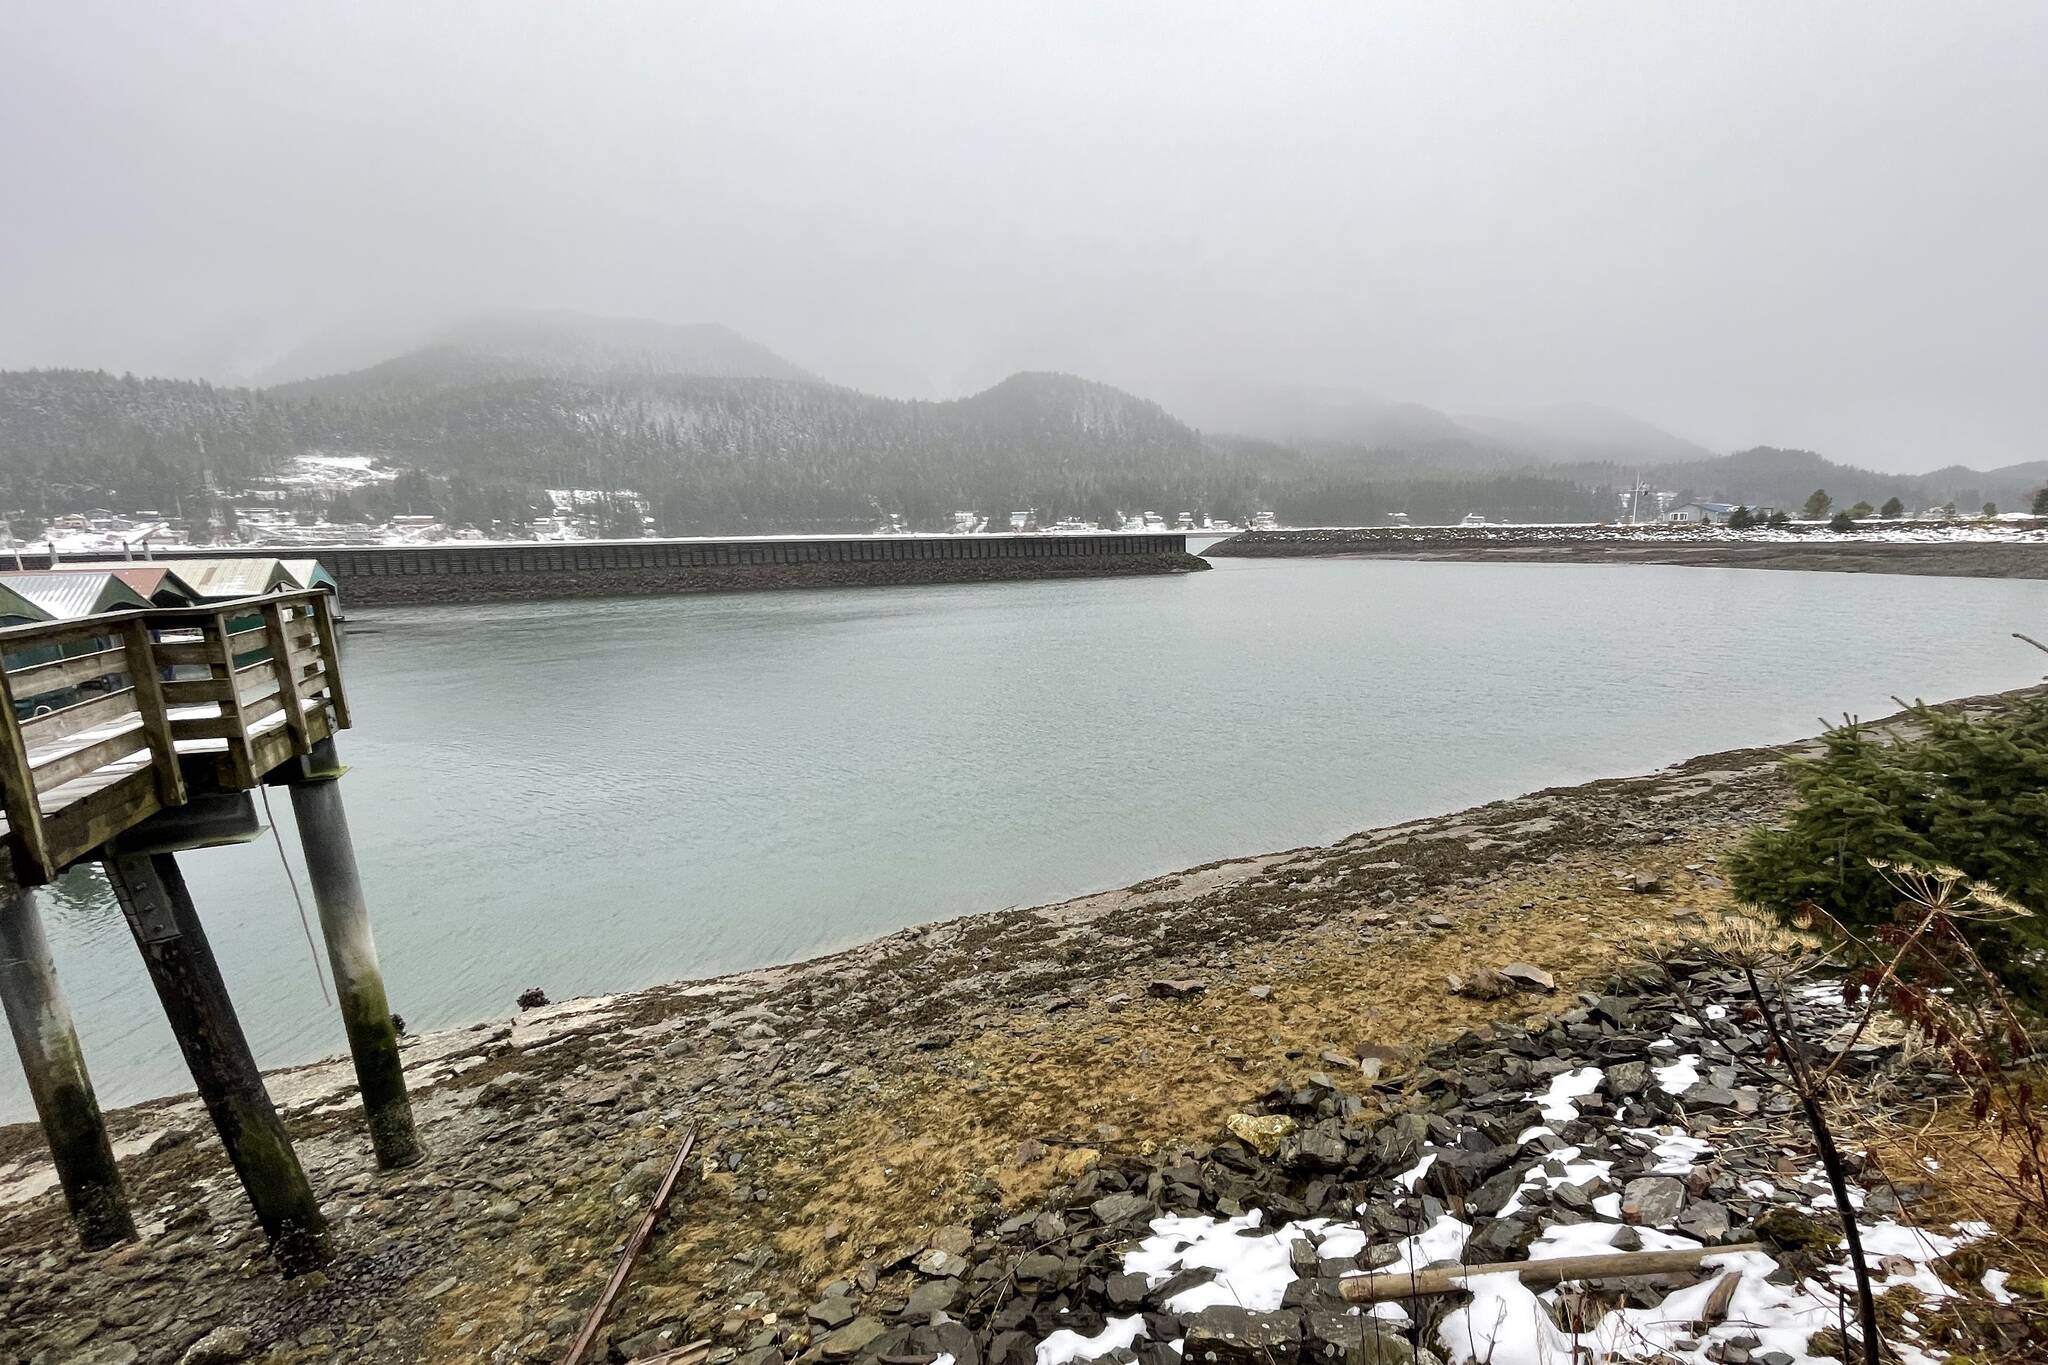 Juneau's Docks and Harbors department is readying for the inbound cruise season as it makes headway on other projects around the city, said the harbormaster. (Michael S. Lockett / Juneau Empire)